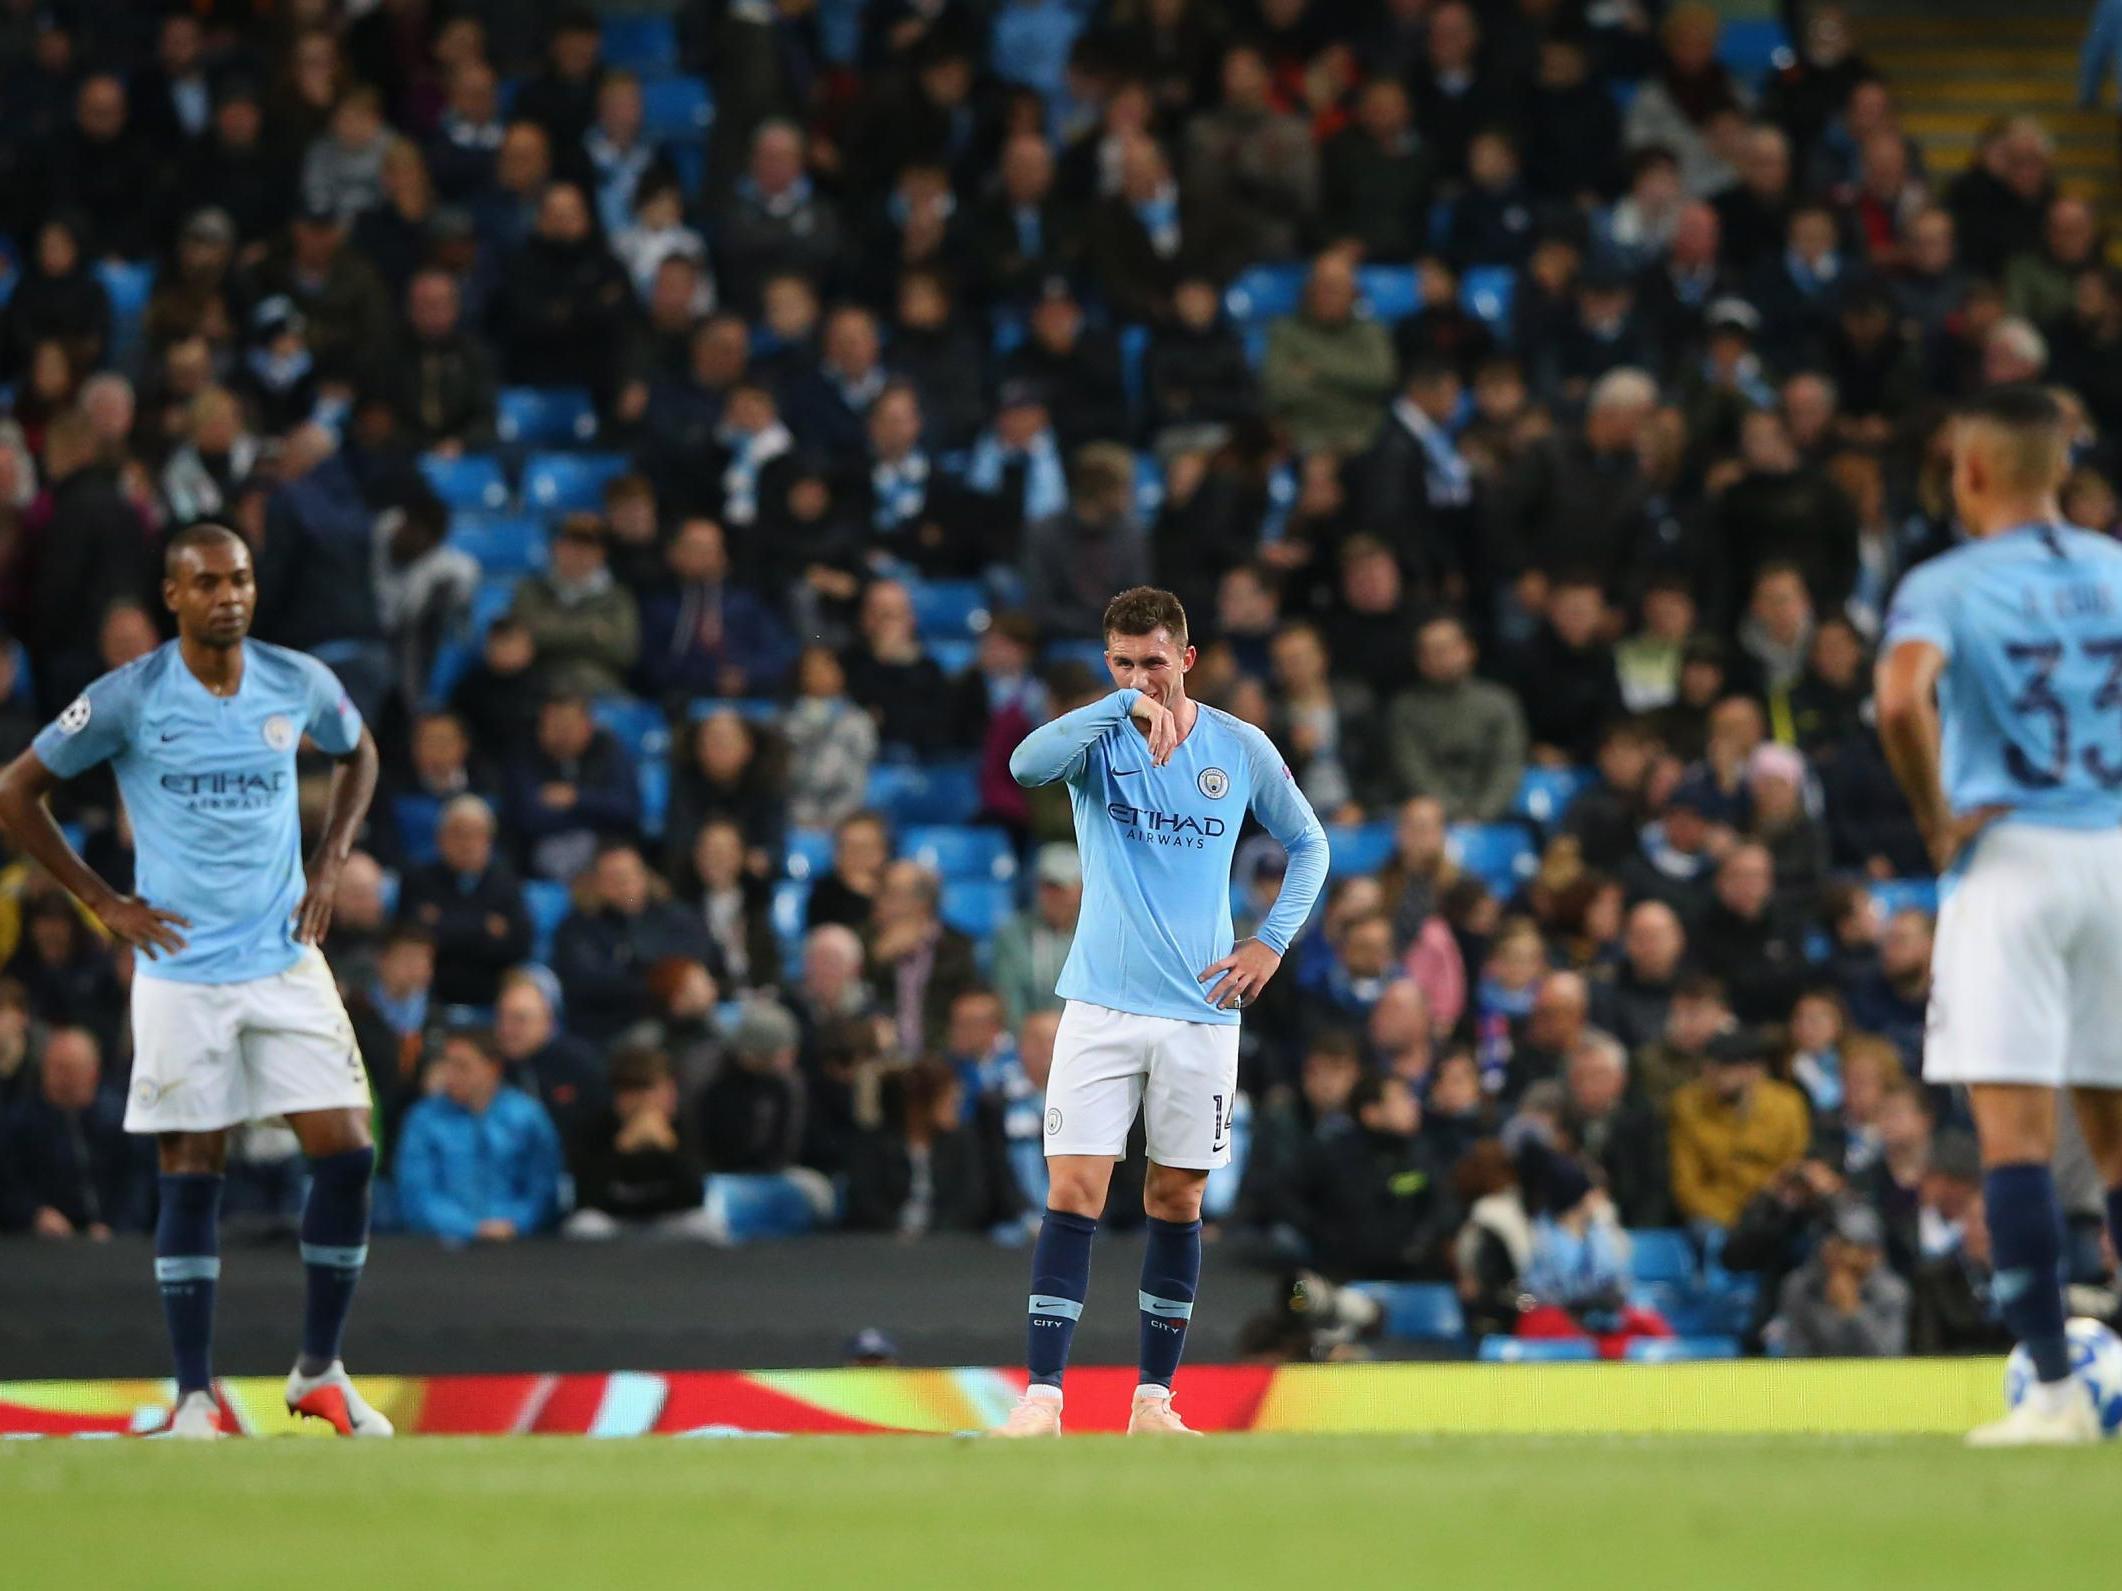 With Pep Guardiola in the stands, Manchester City fell short on the pitch